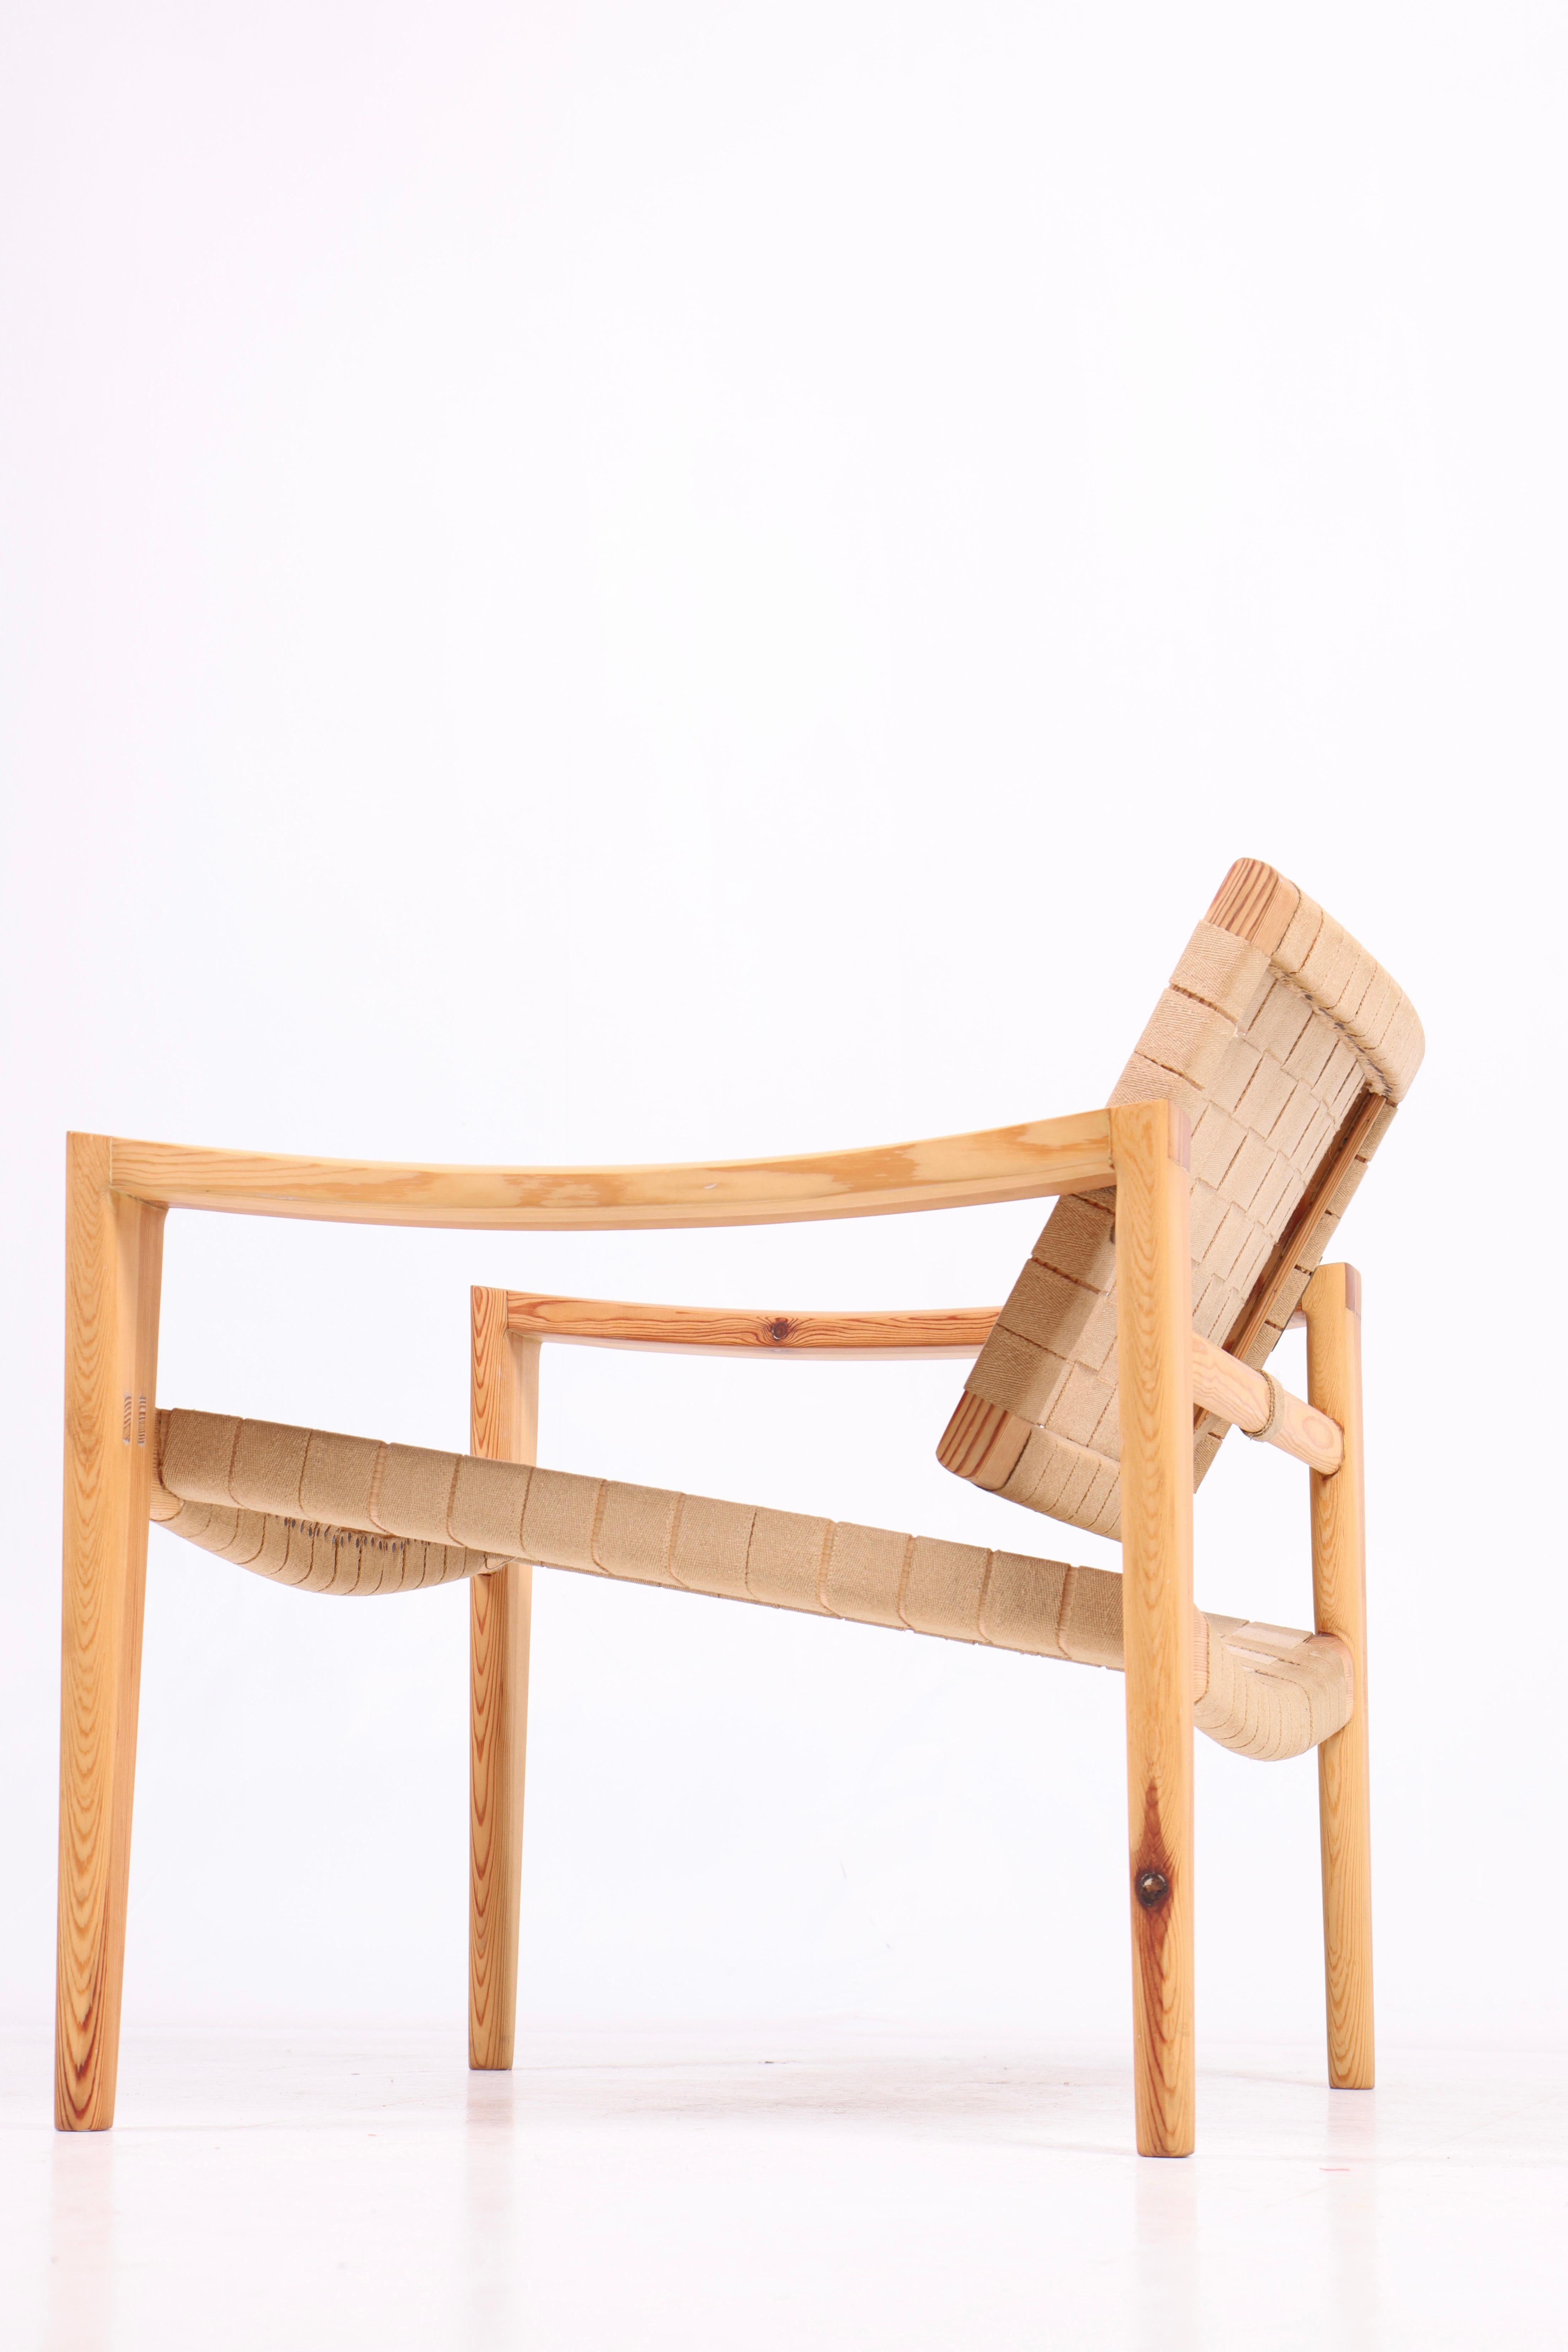 Leather Rare 'Buck' Chair in Pine by Hans J. Wegner, 1959. For Sale